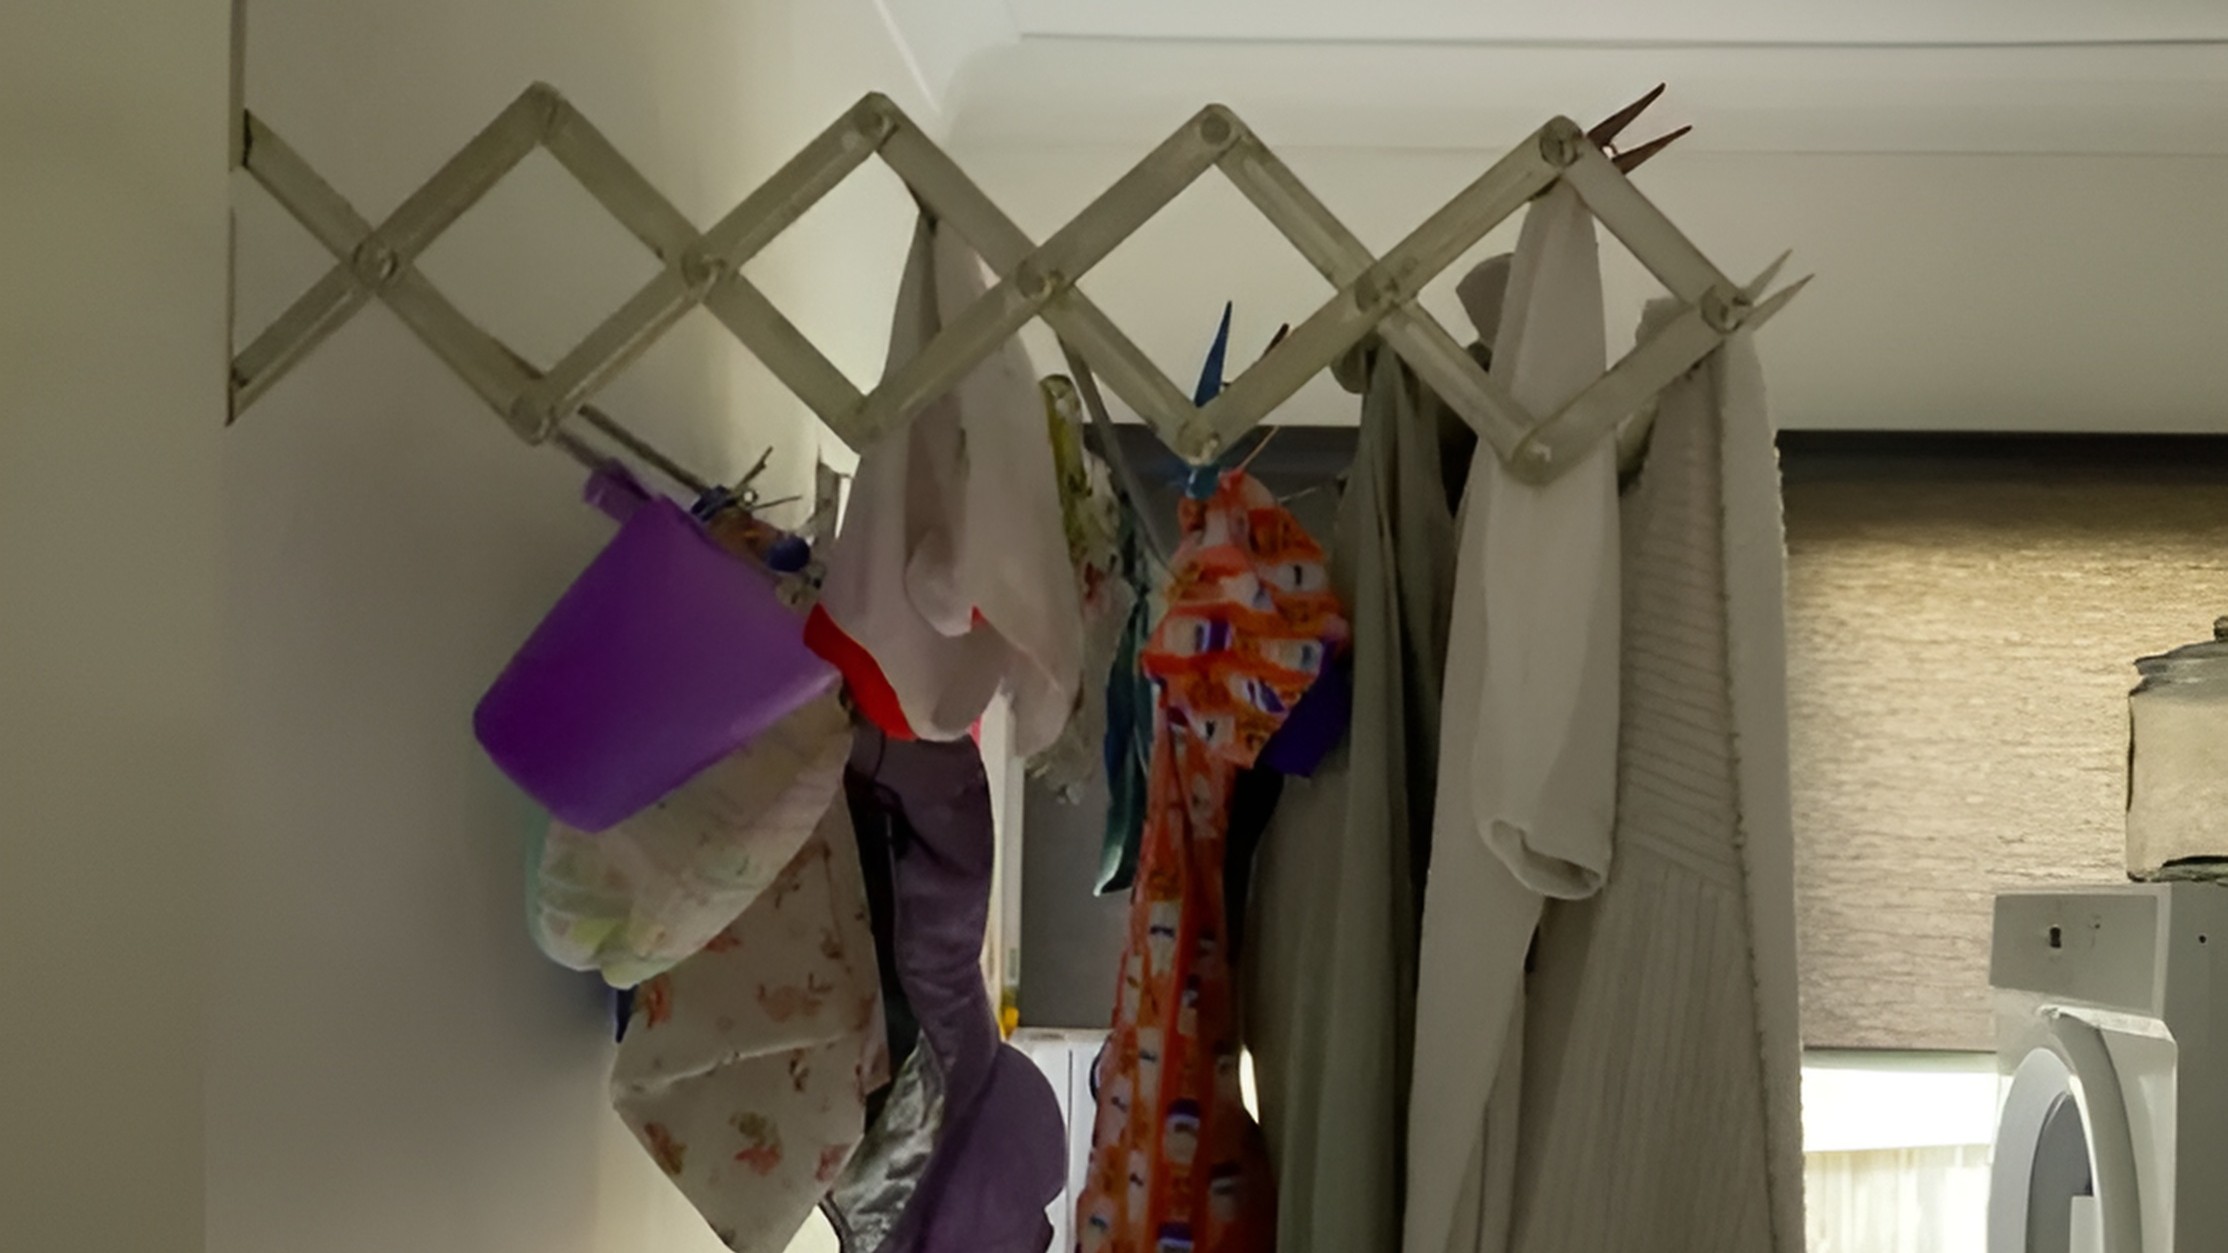 Wall Mounted Drying Rack Catering to Different Laundry Loads